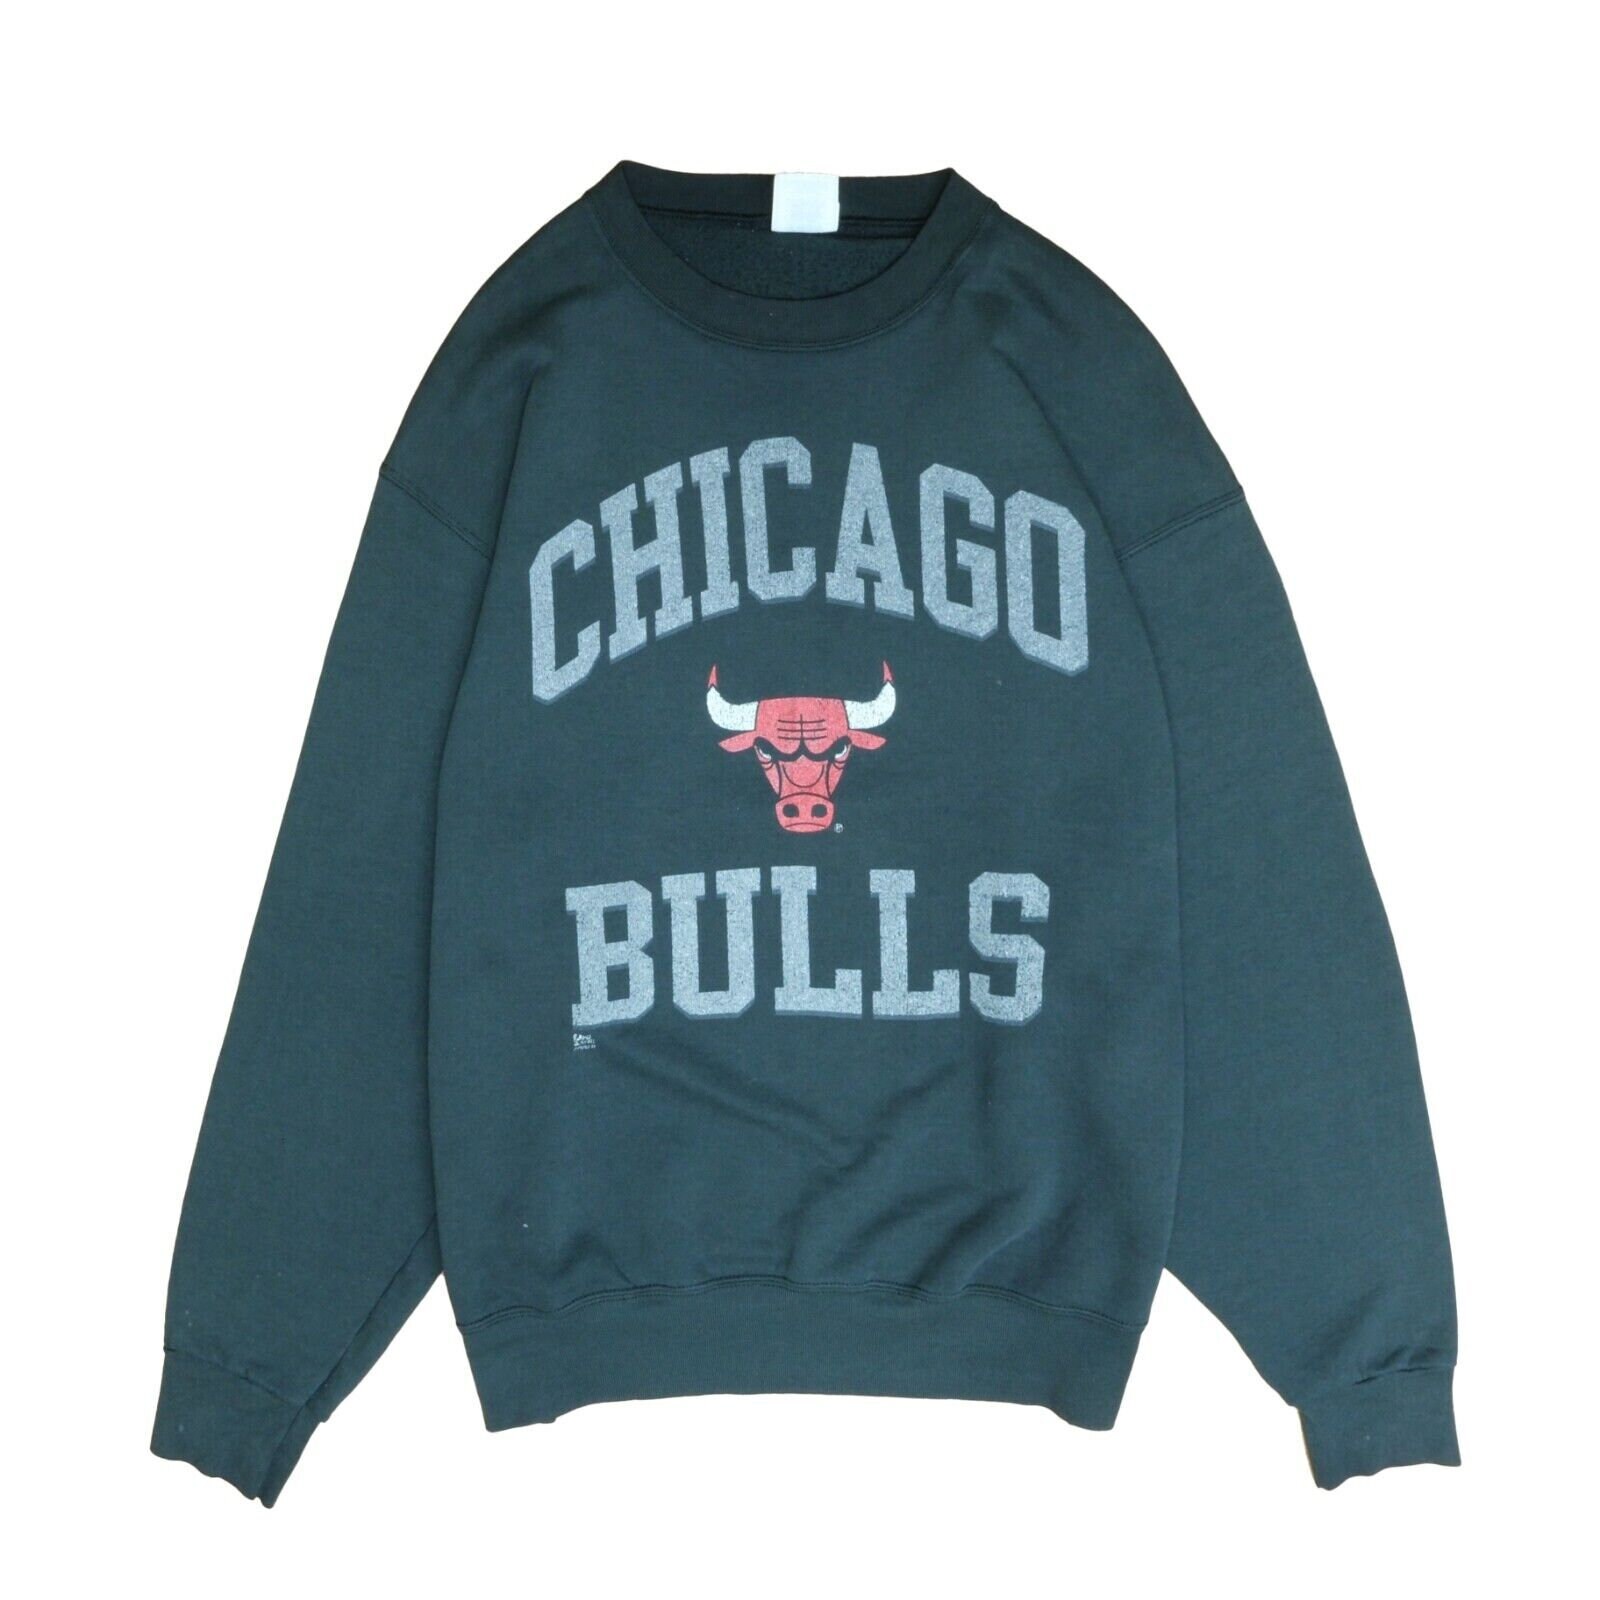 Vintage Chicago Bulls Sweatshirt Mens Size Large Pro Player New Made in USA